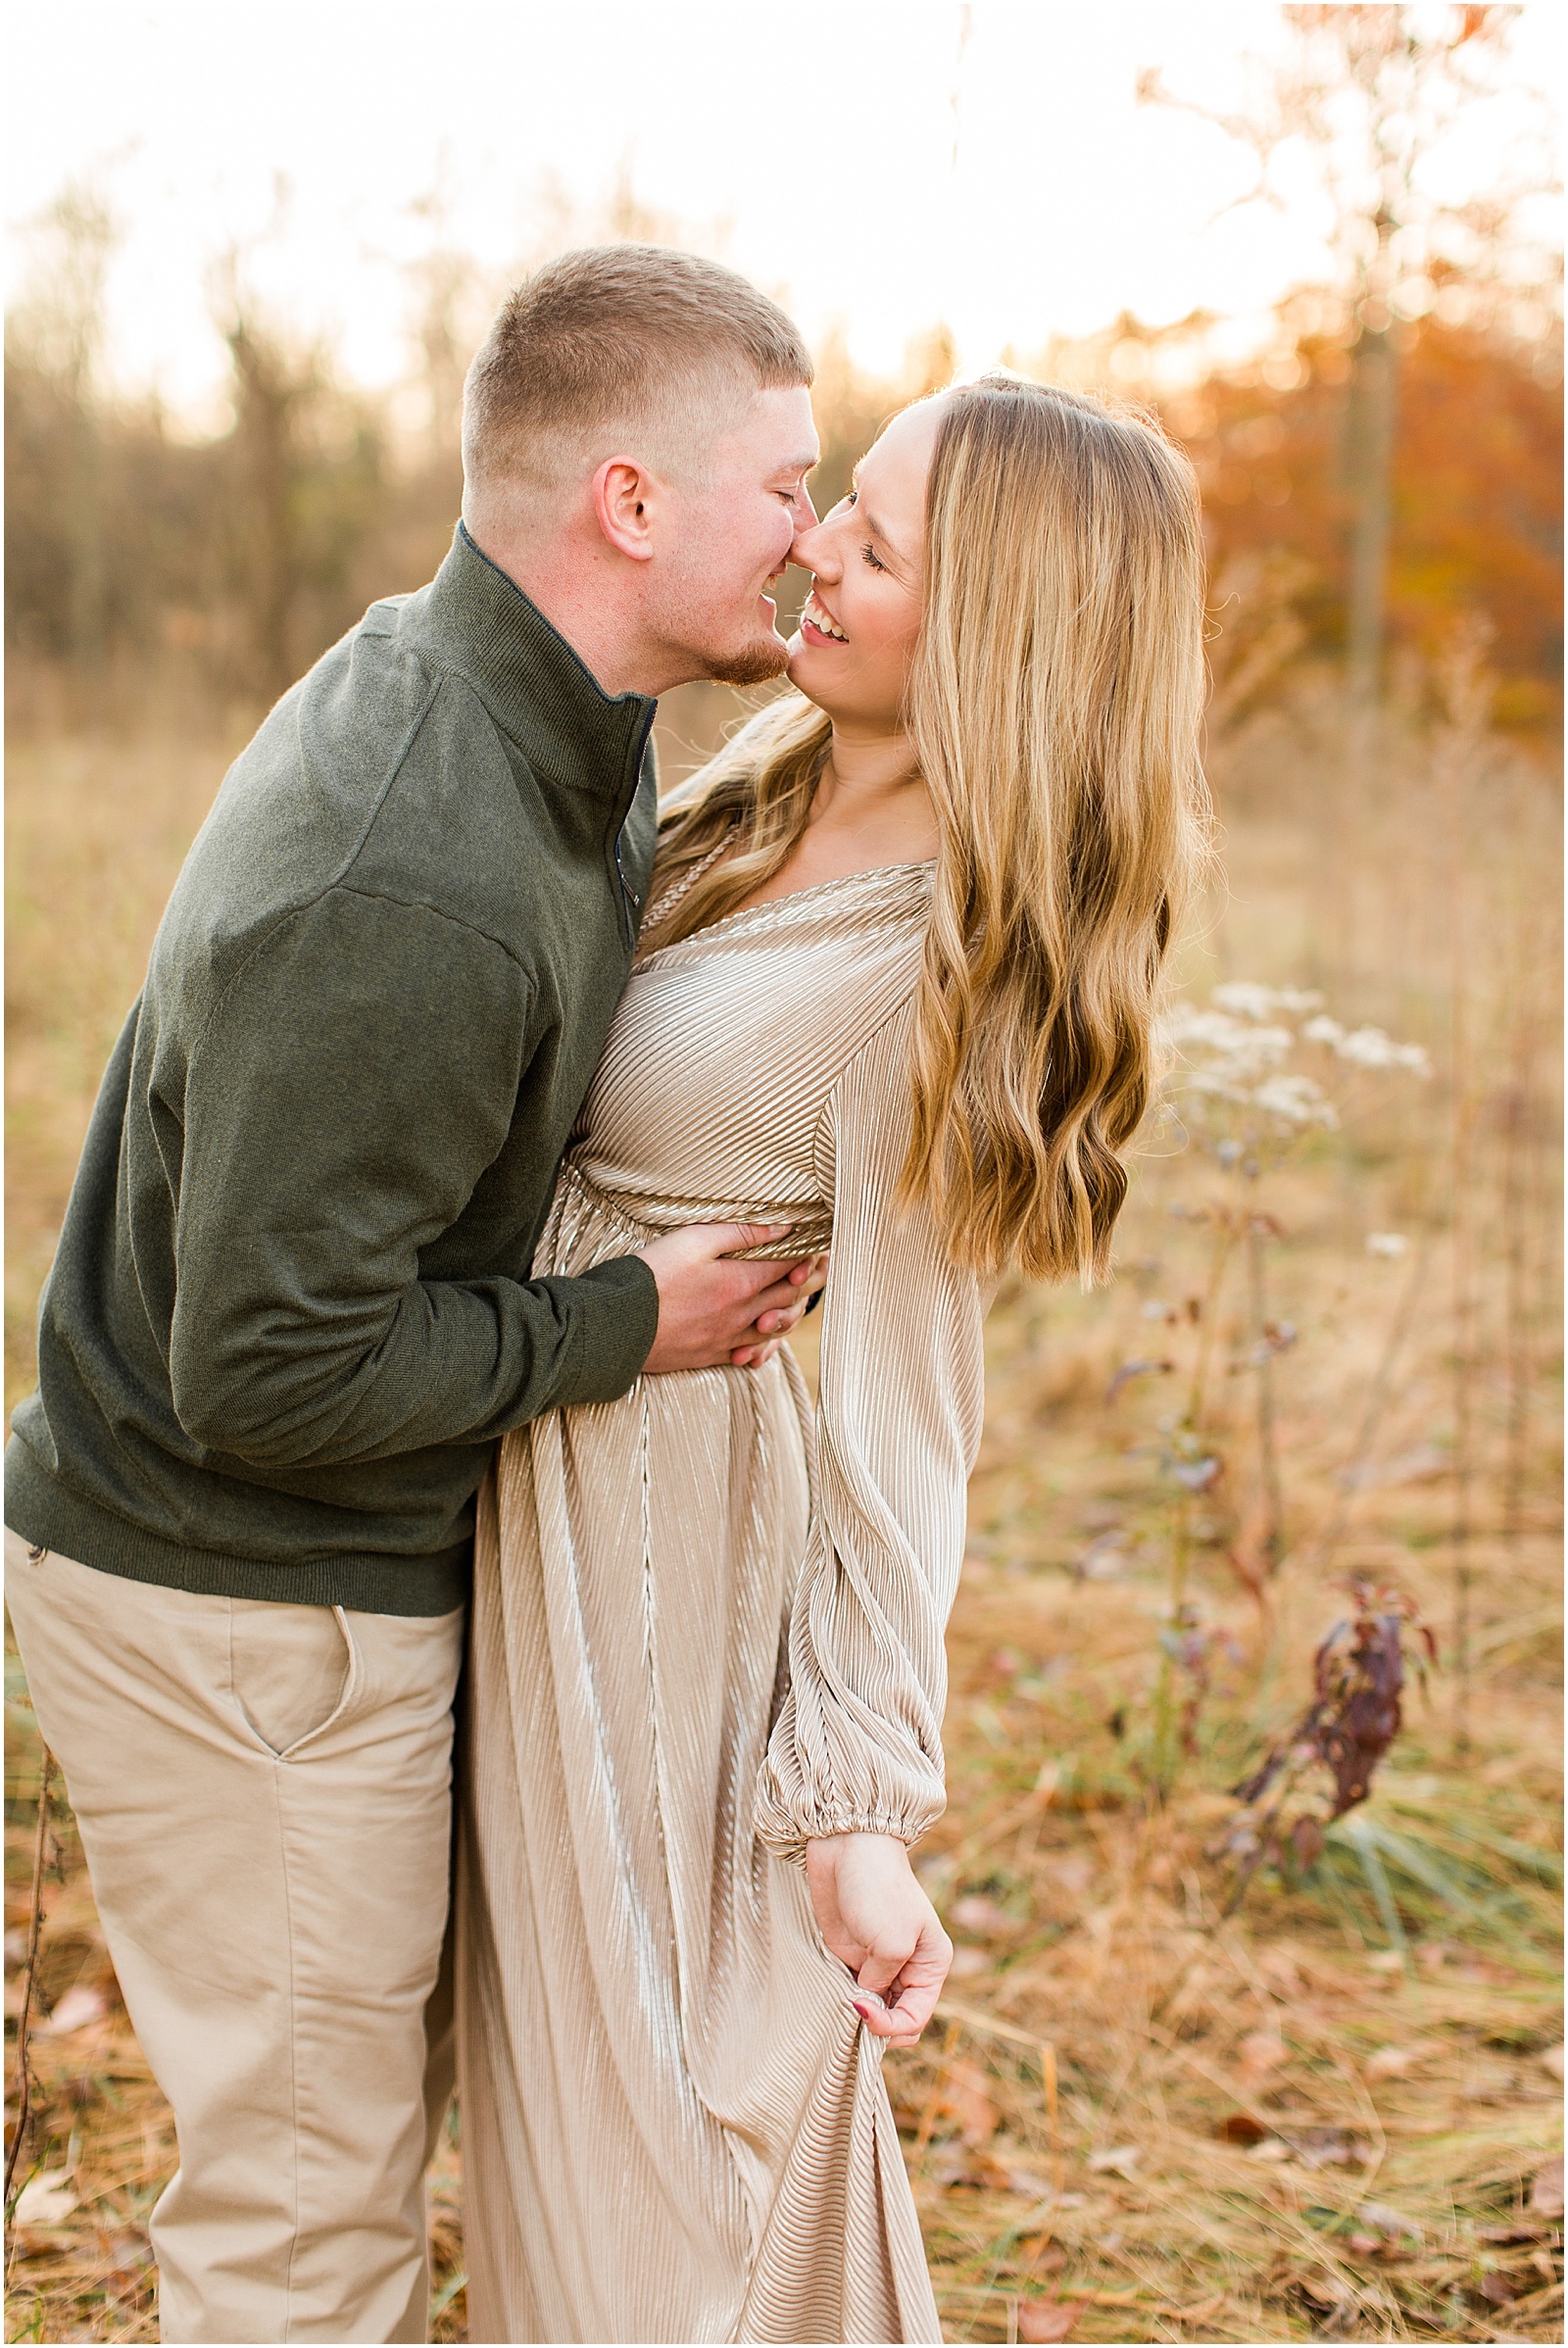 A Fall Southern Indiana Engagement Seesion | Cody and Hannah | Bret and Brandie Photography 042.jpg